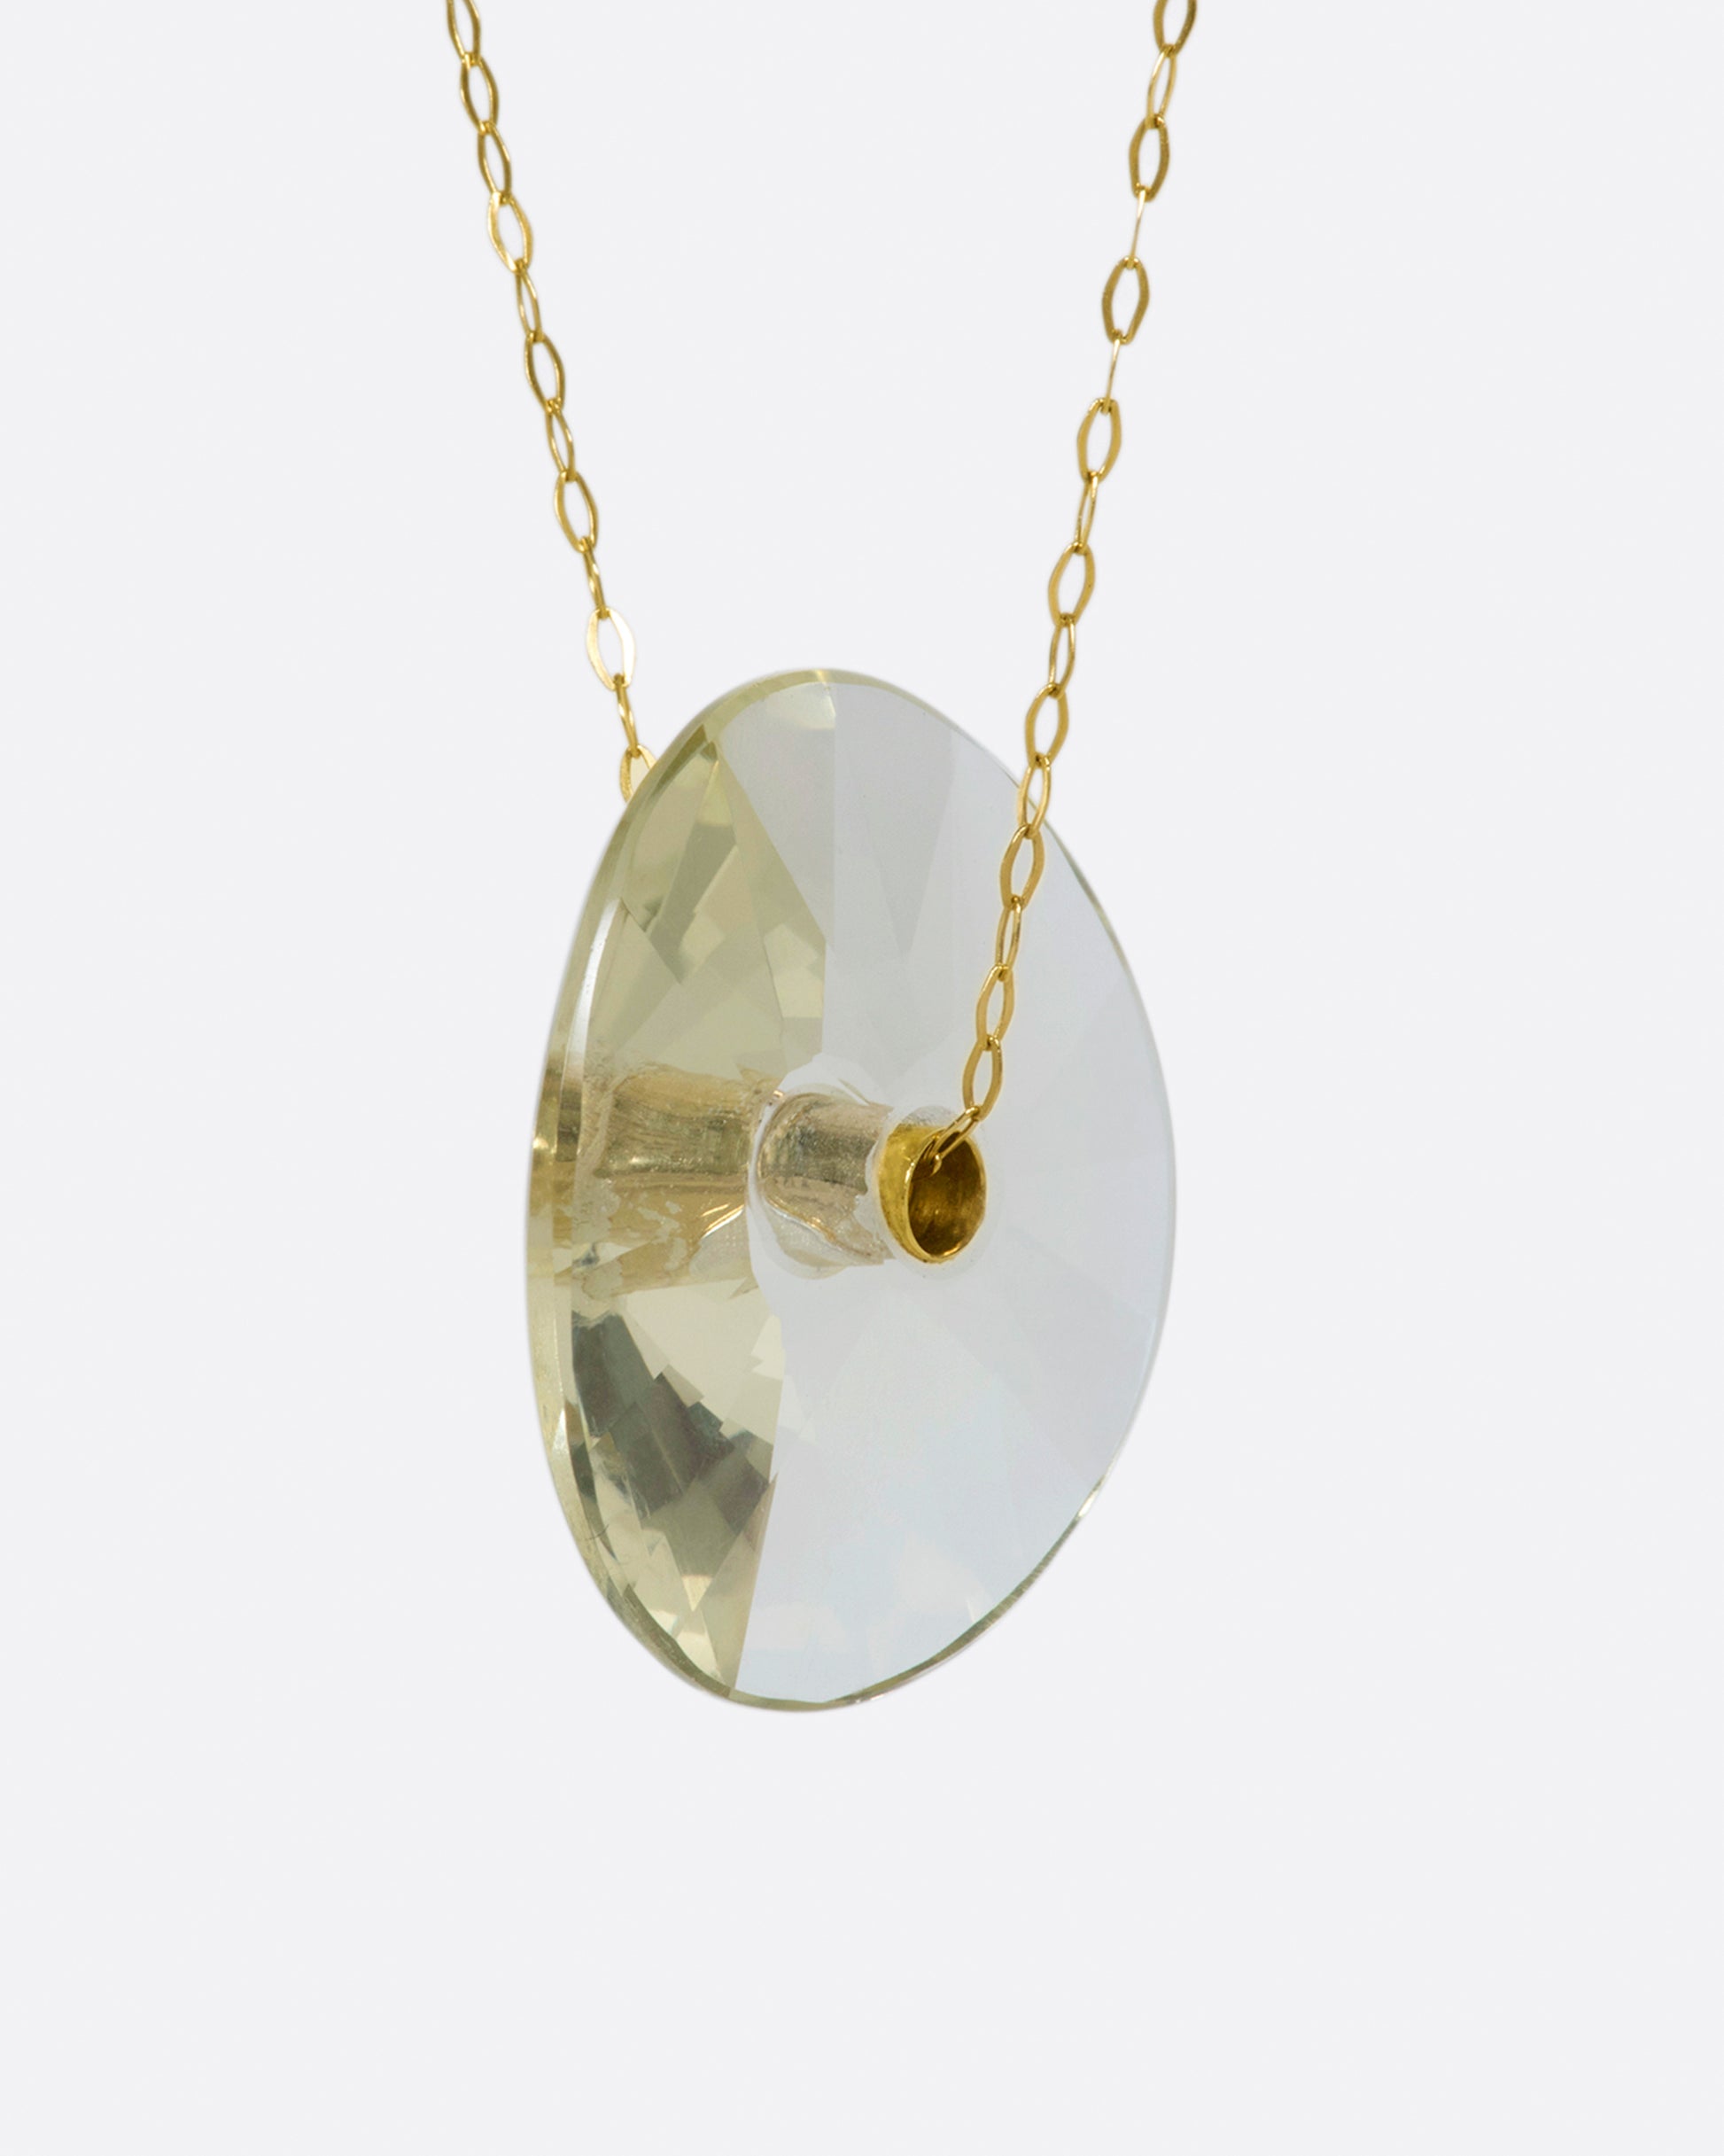 A yellow gold chain necklace with a large champagne quartz bead pendant.